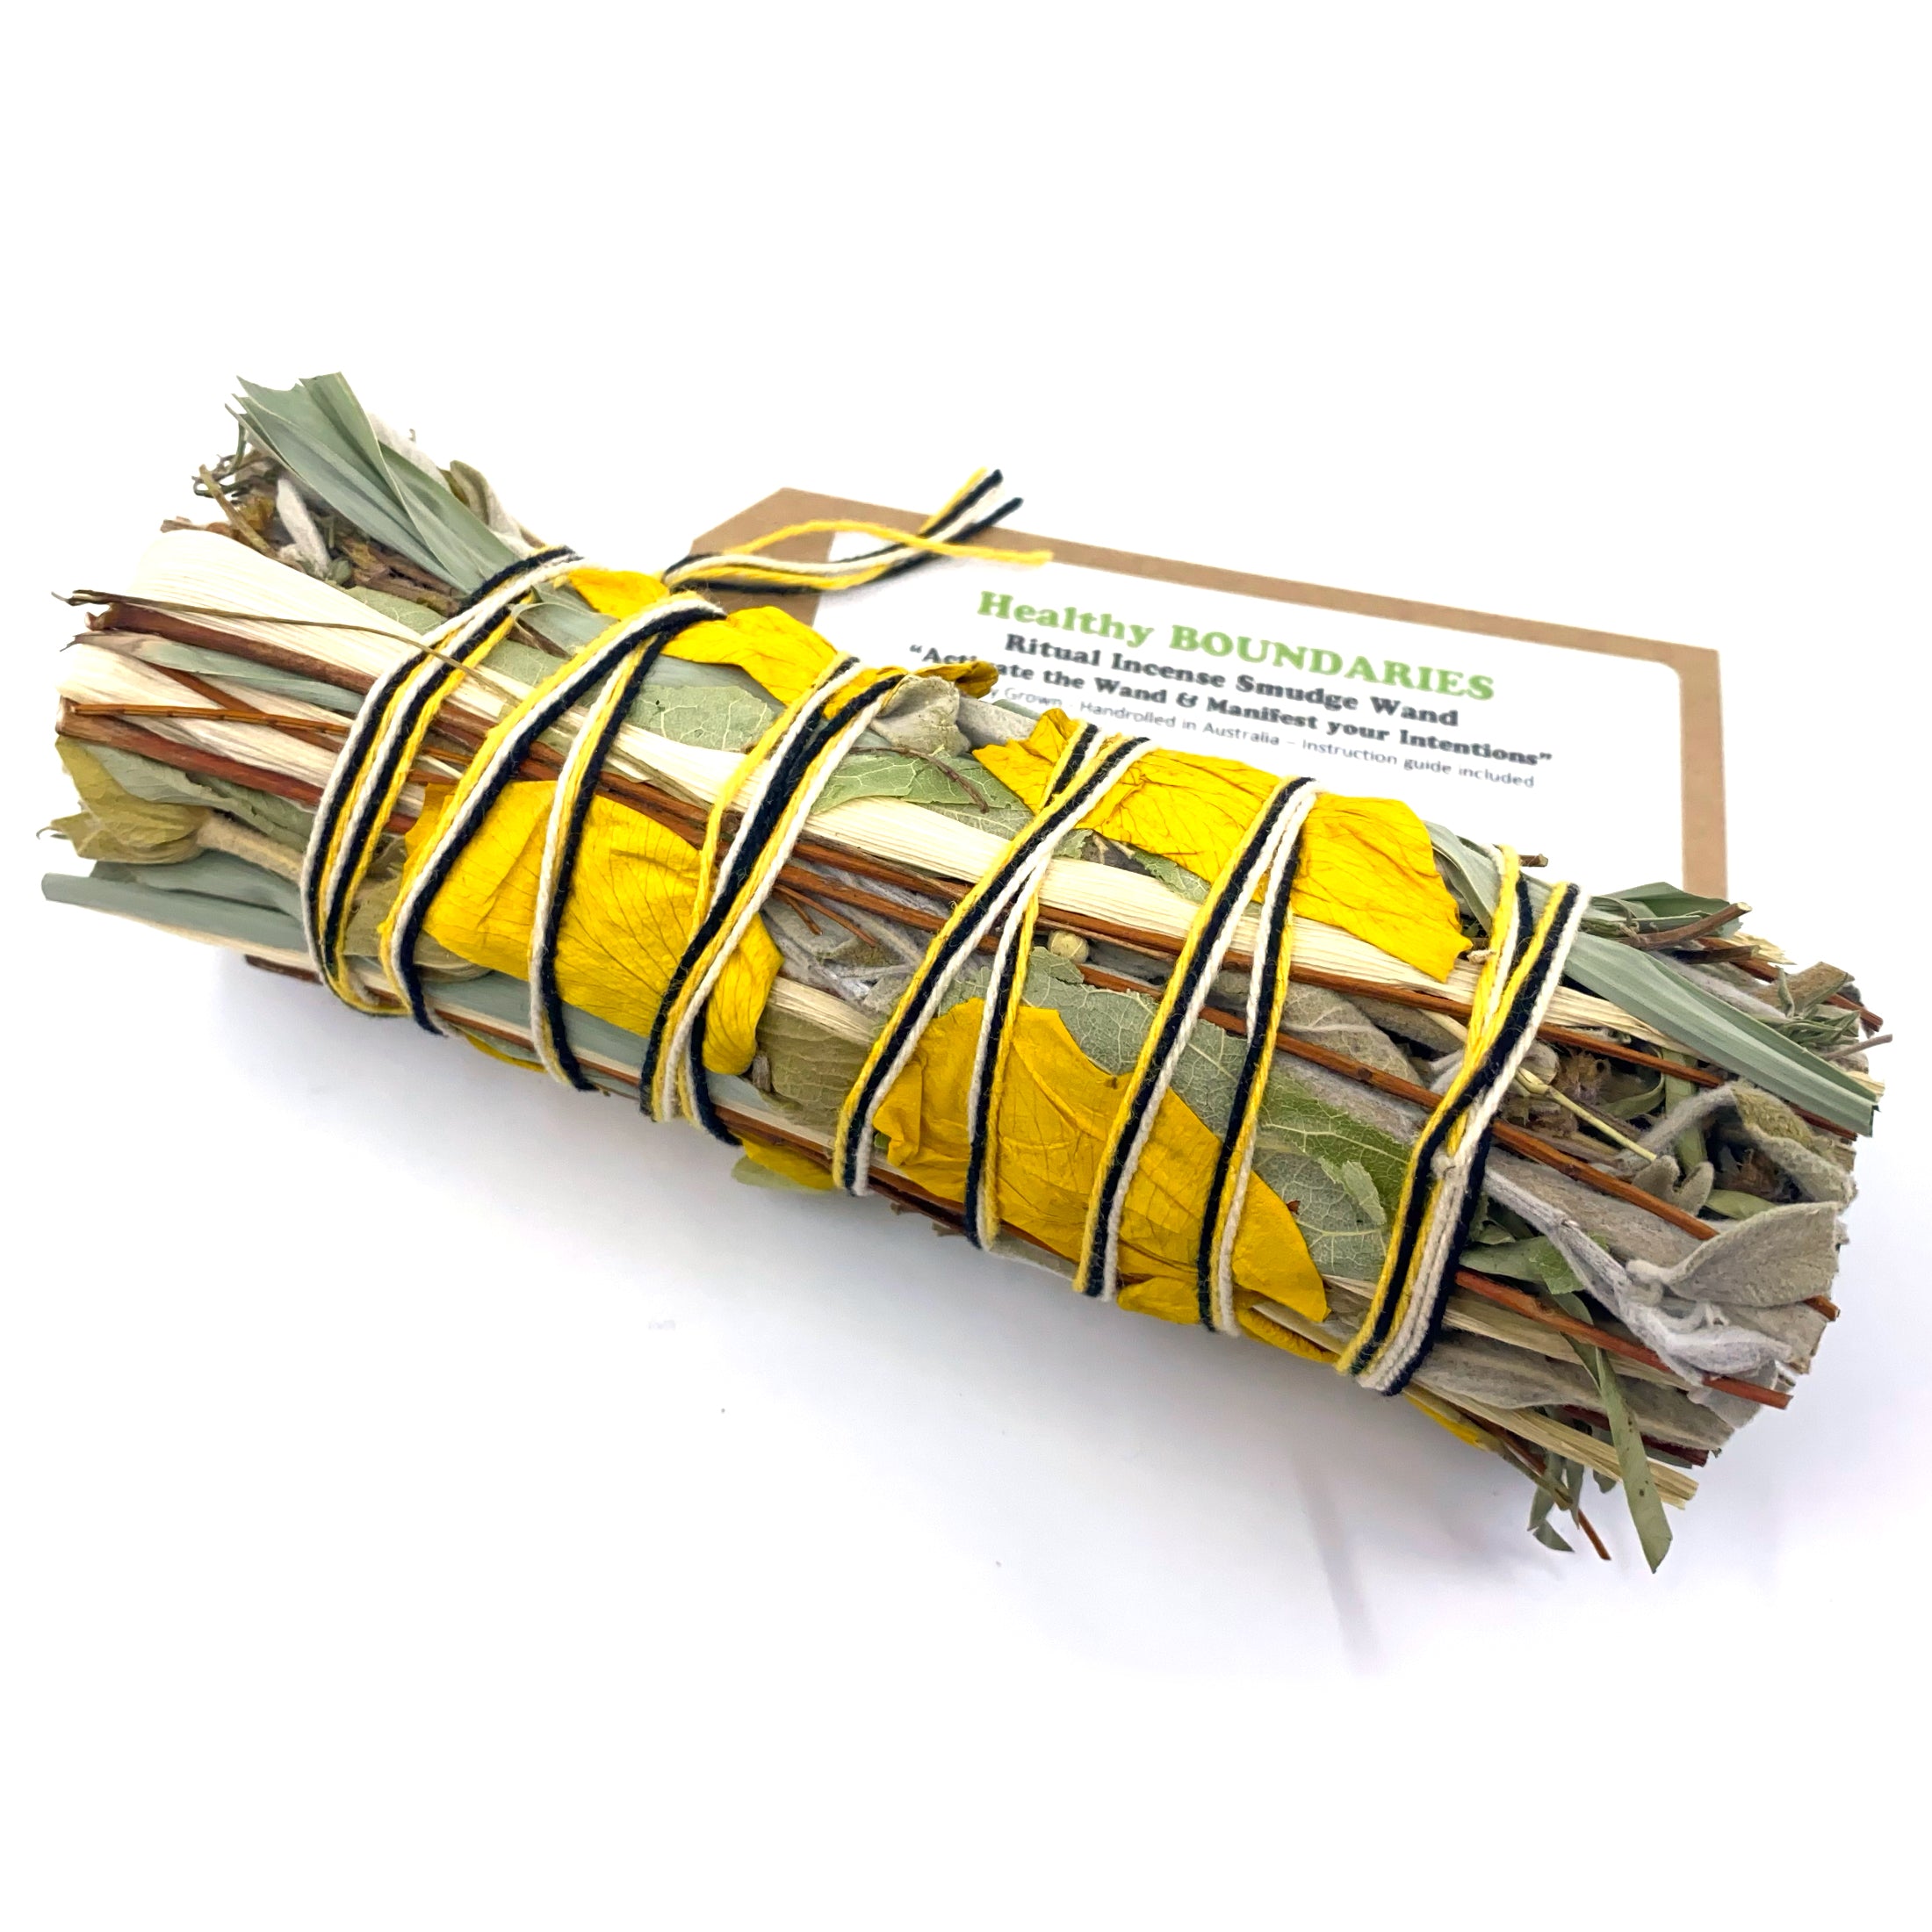 Healthy Boundaries - With Good Intentions Smudge Stick